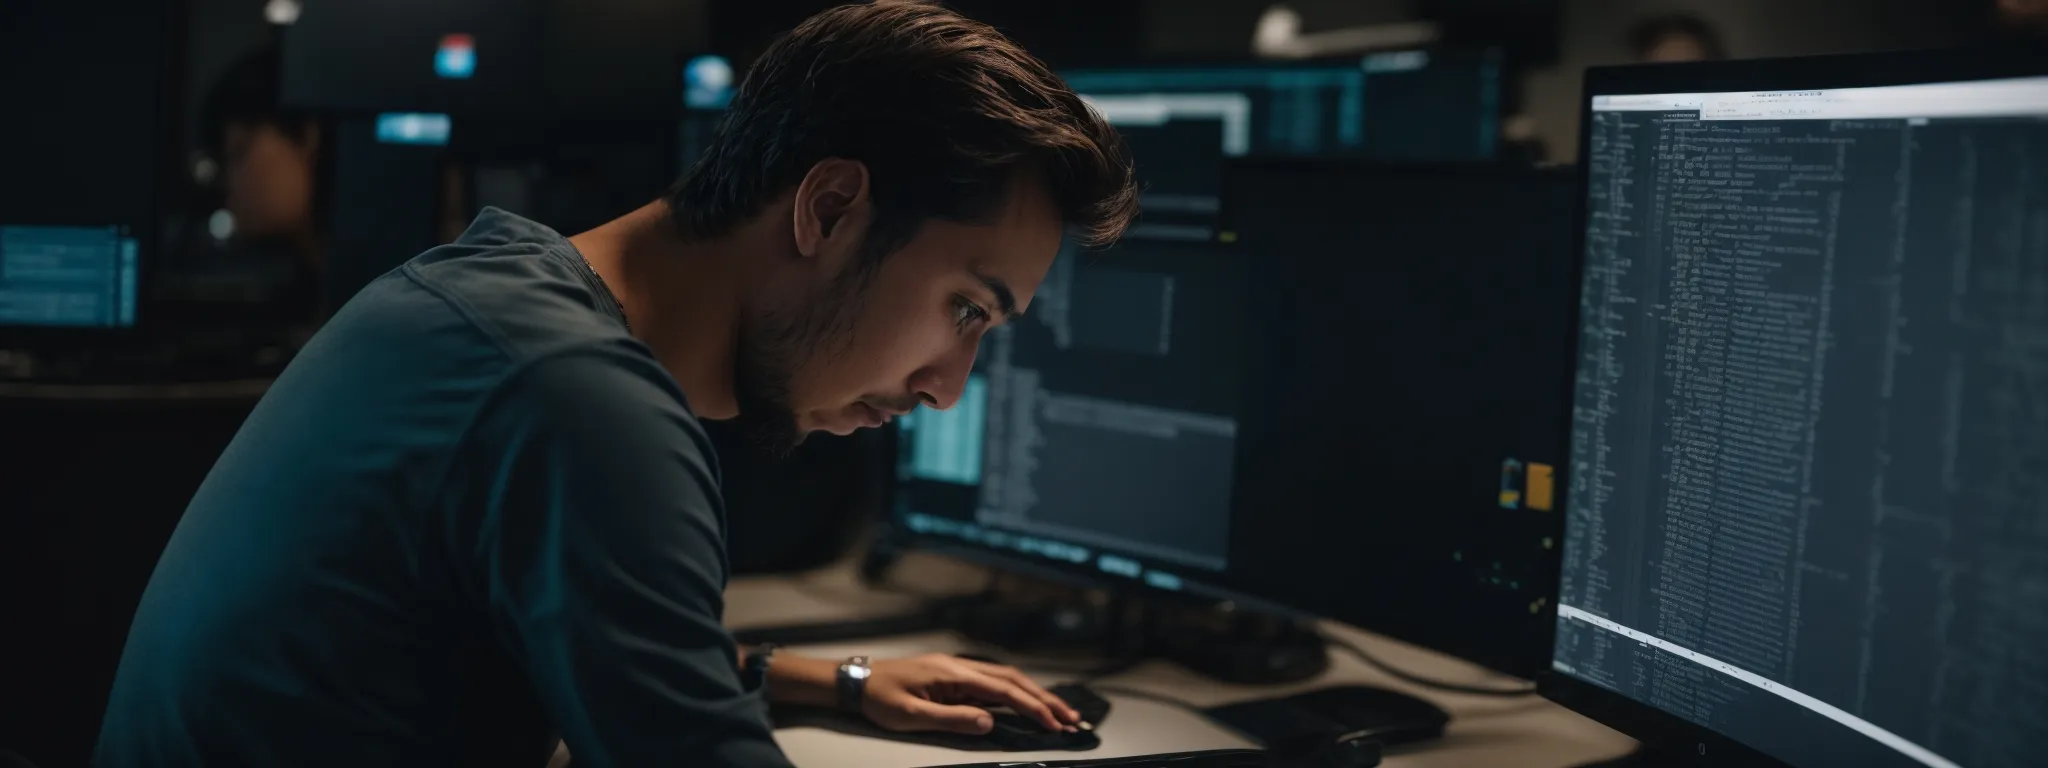 a web developer intently scrutinizes code on a computer screen while configuring a sleek, modern interface for a single-page application.